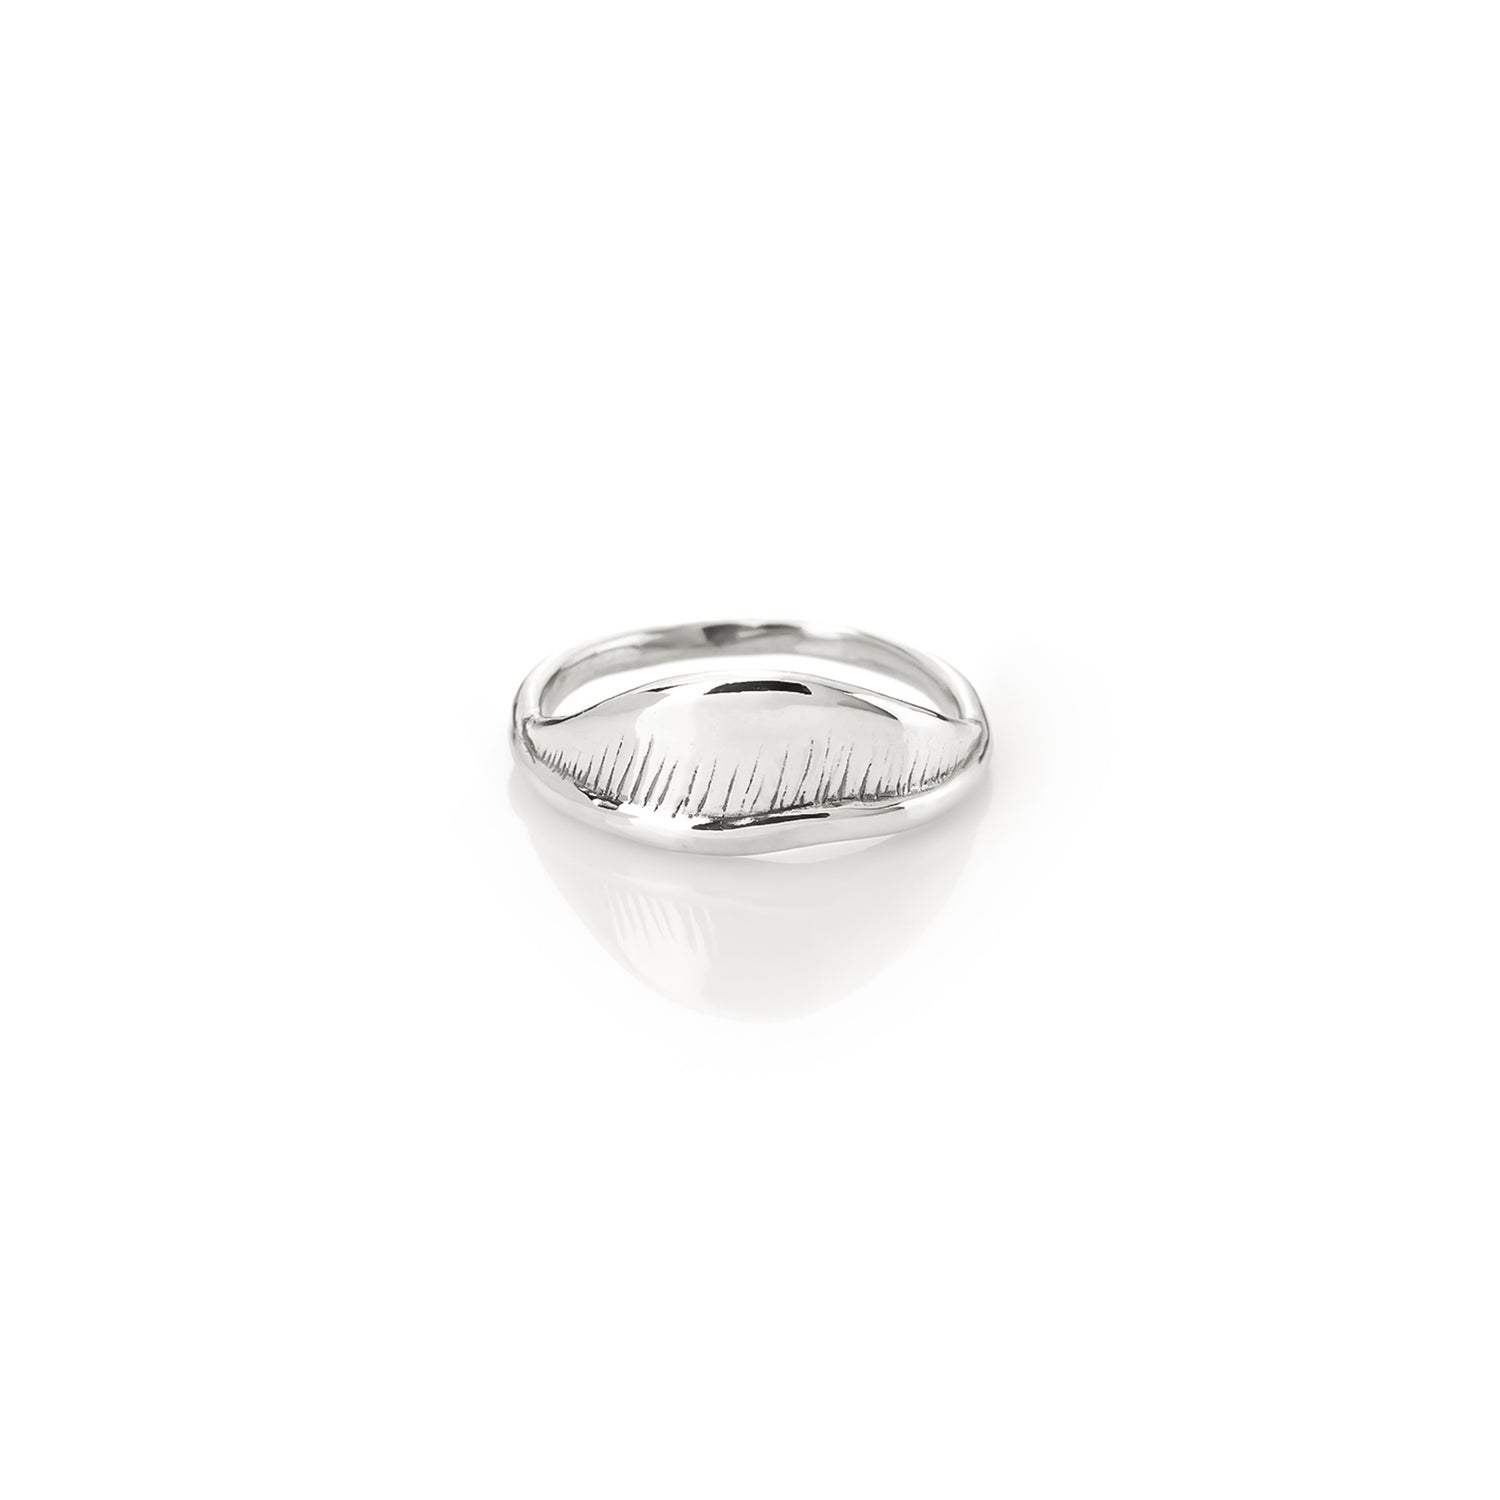 DEVOTIONS RING BY CATORI LIFE